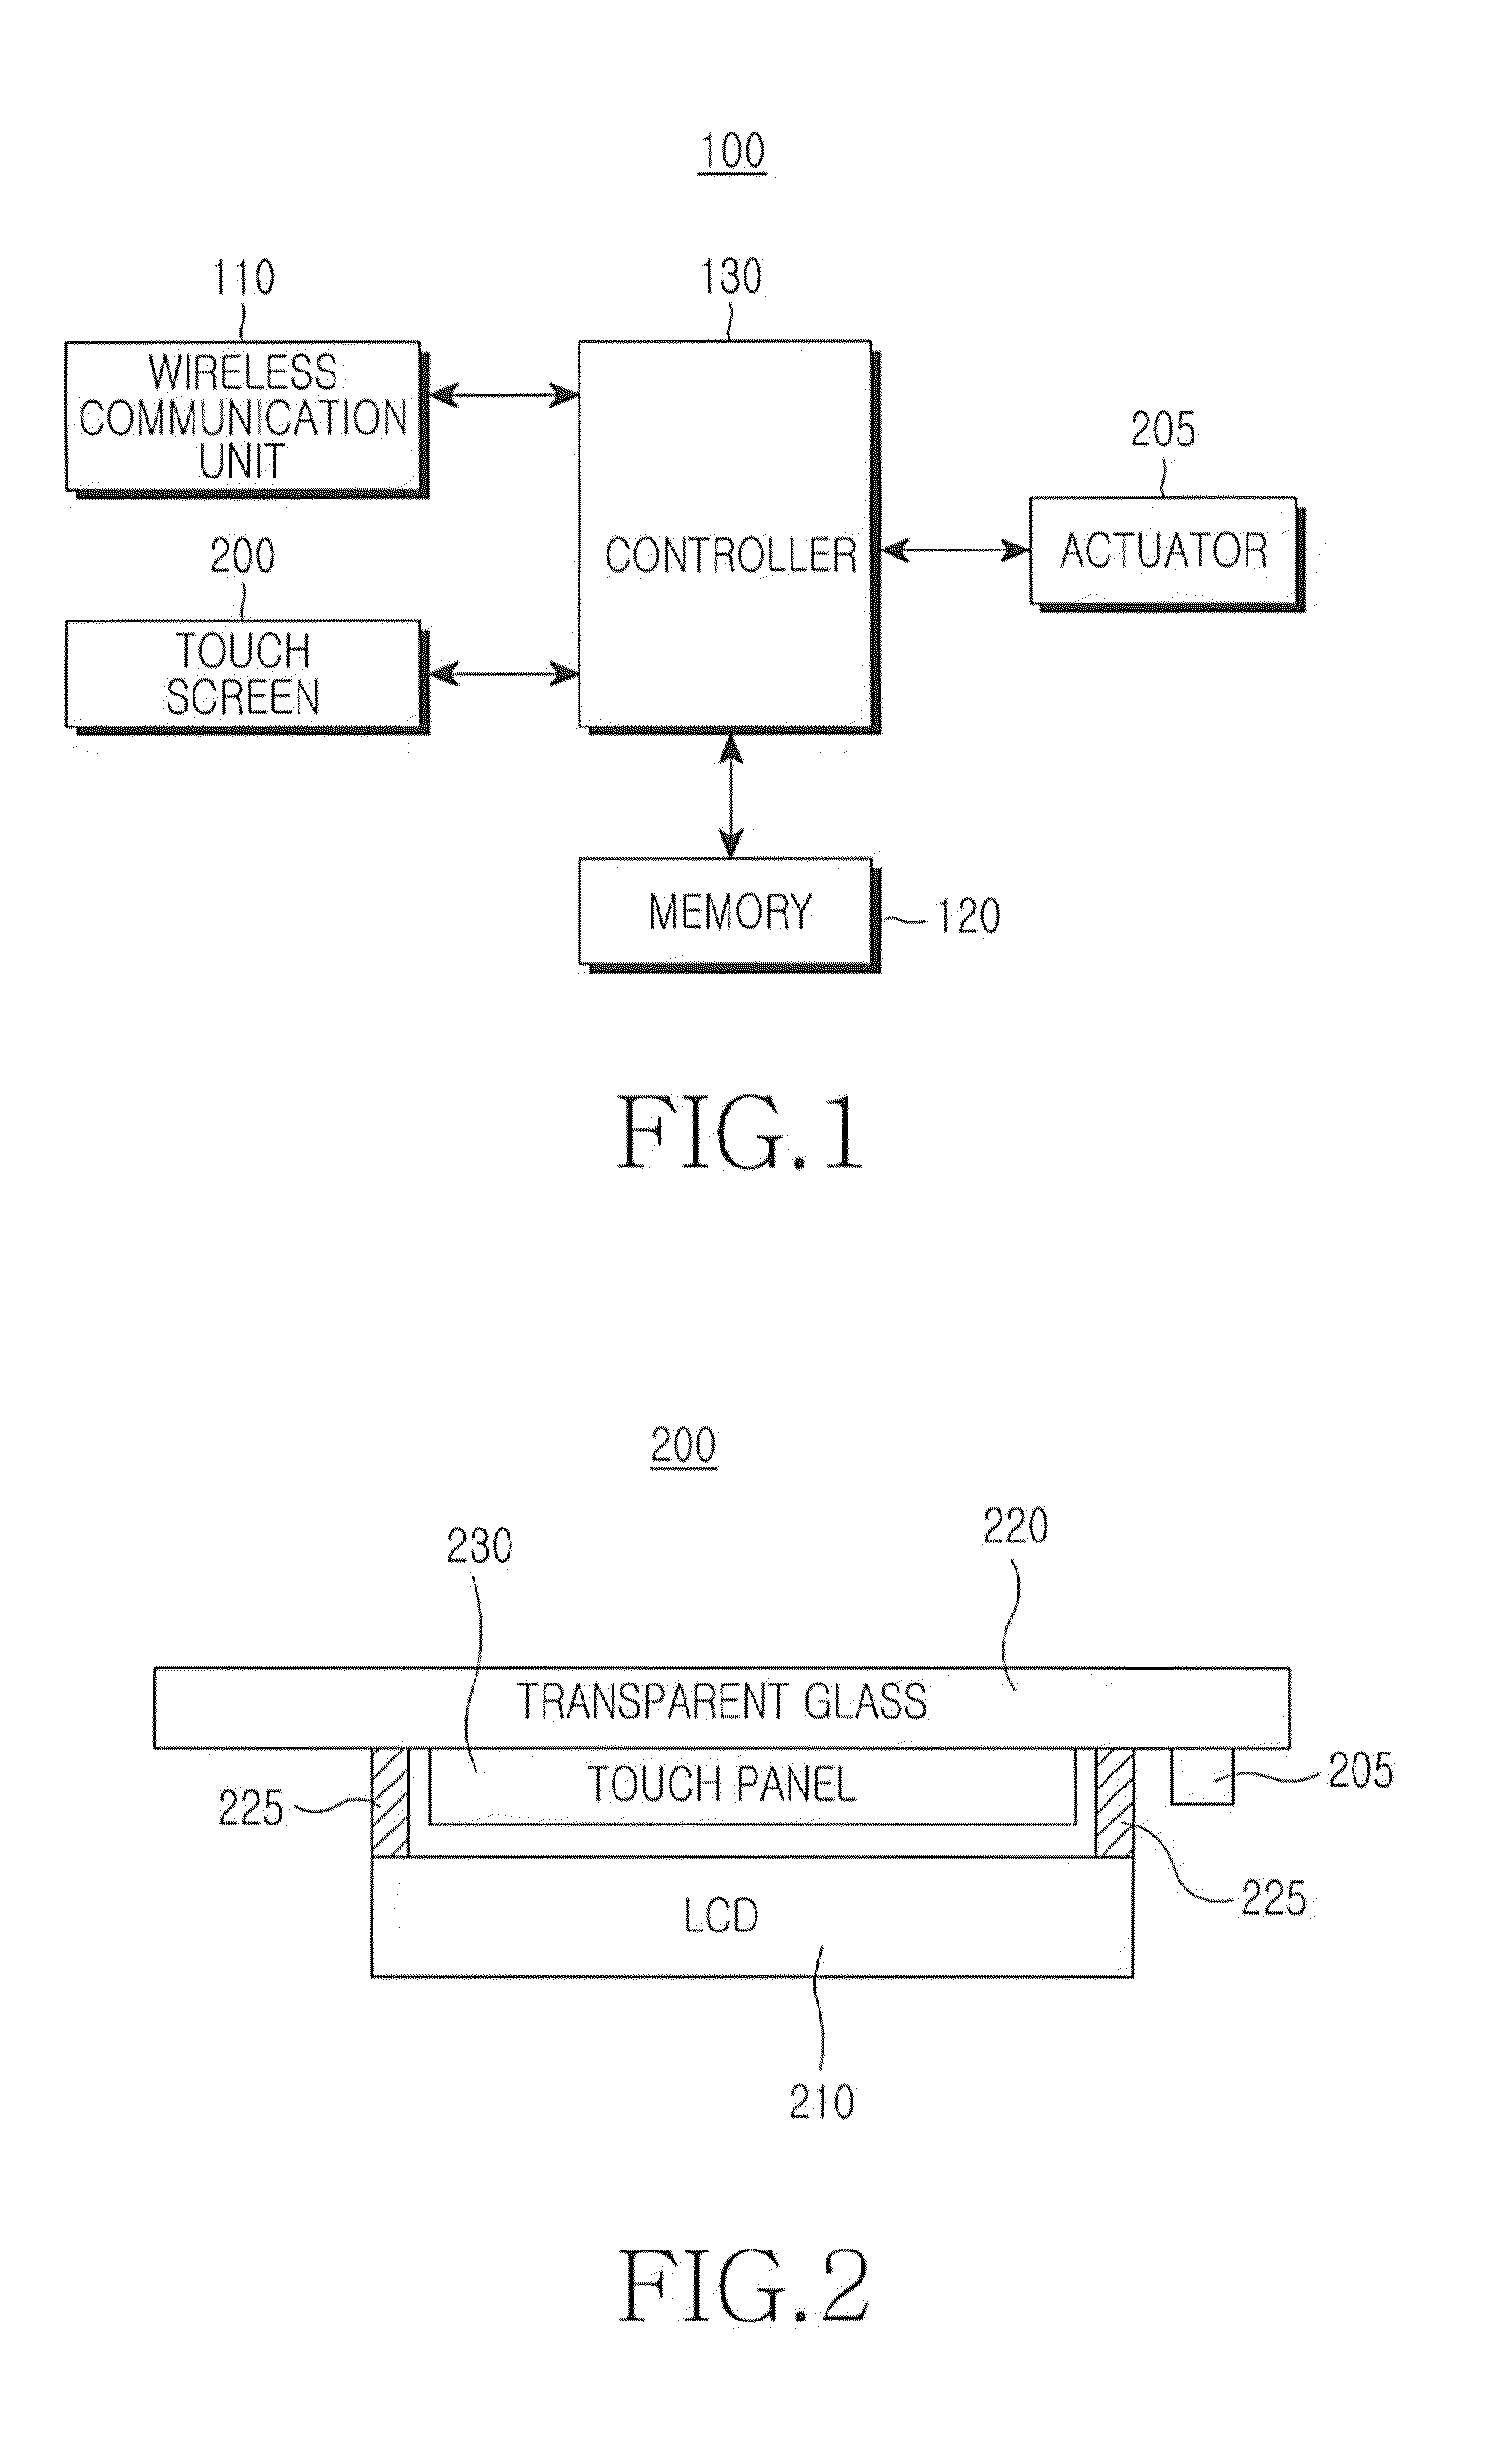 Method for providing haptic feedback in a touch screen